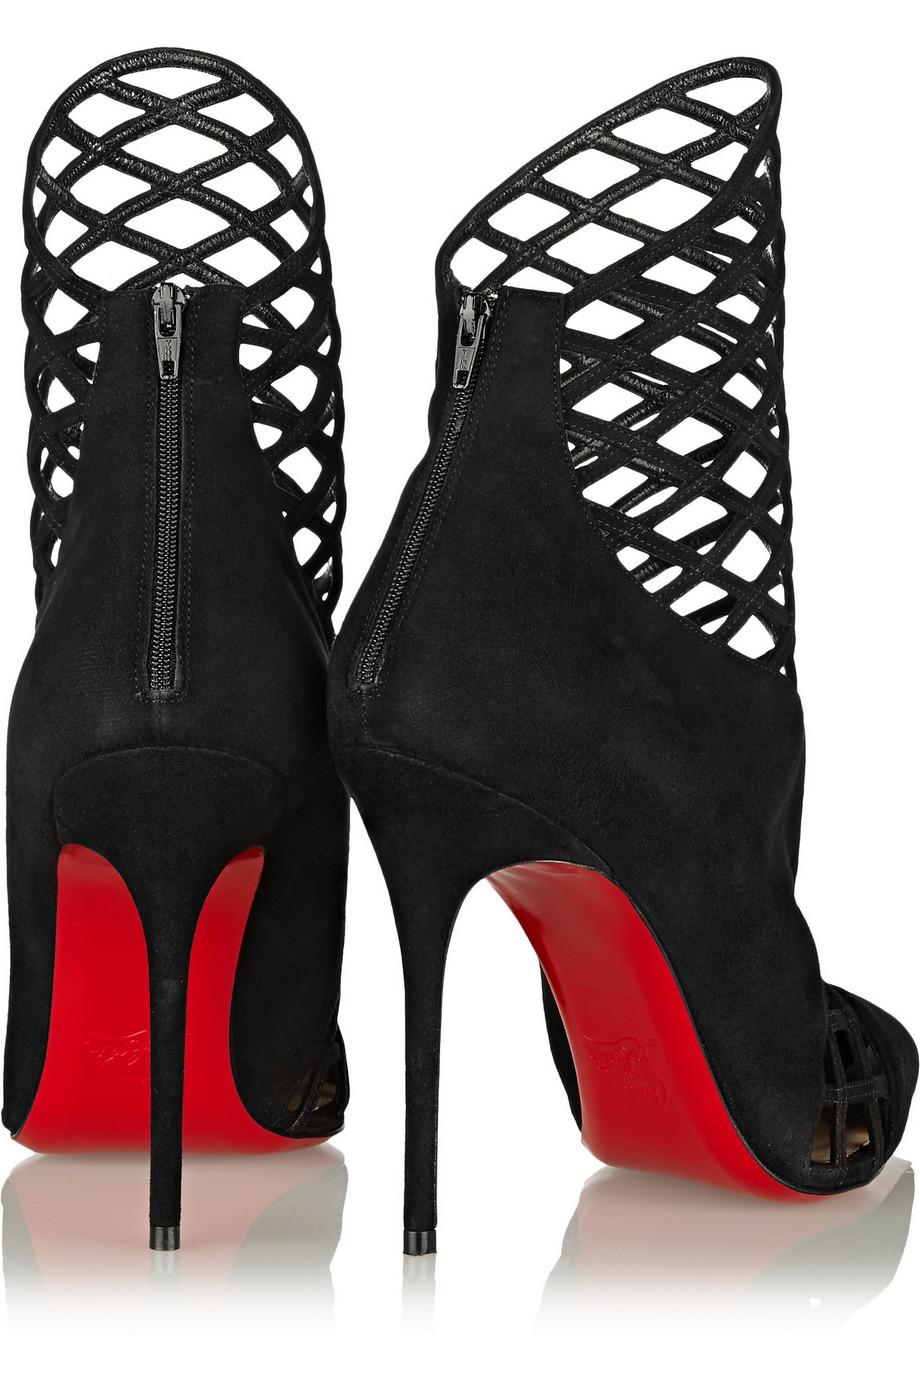 Christian Louboutin NEW Black Suede Evening Cut Out Ankle Boots Booties in Box 2